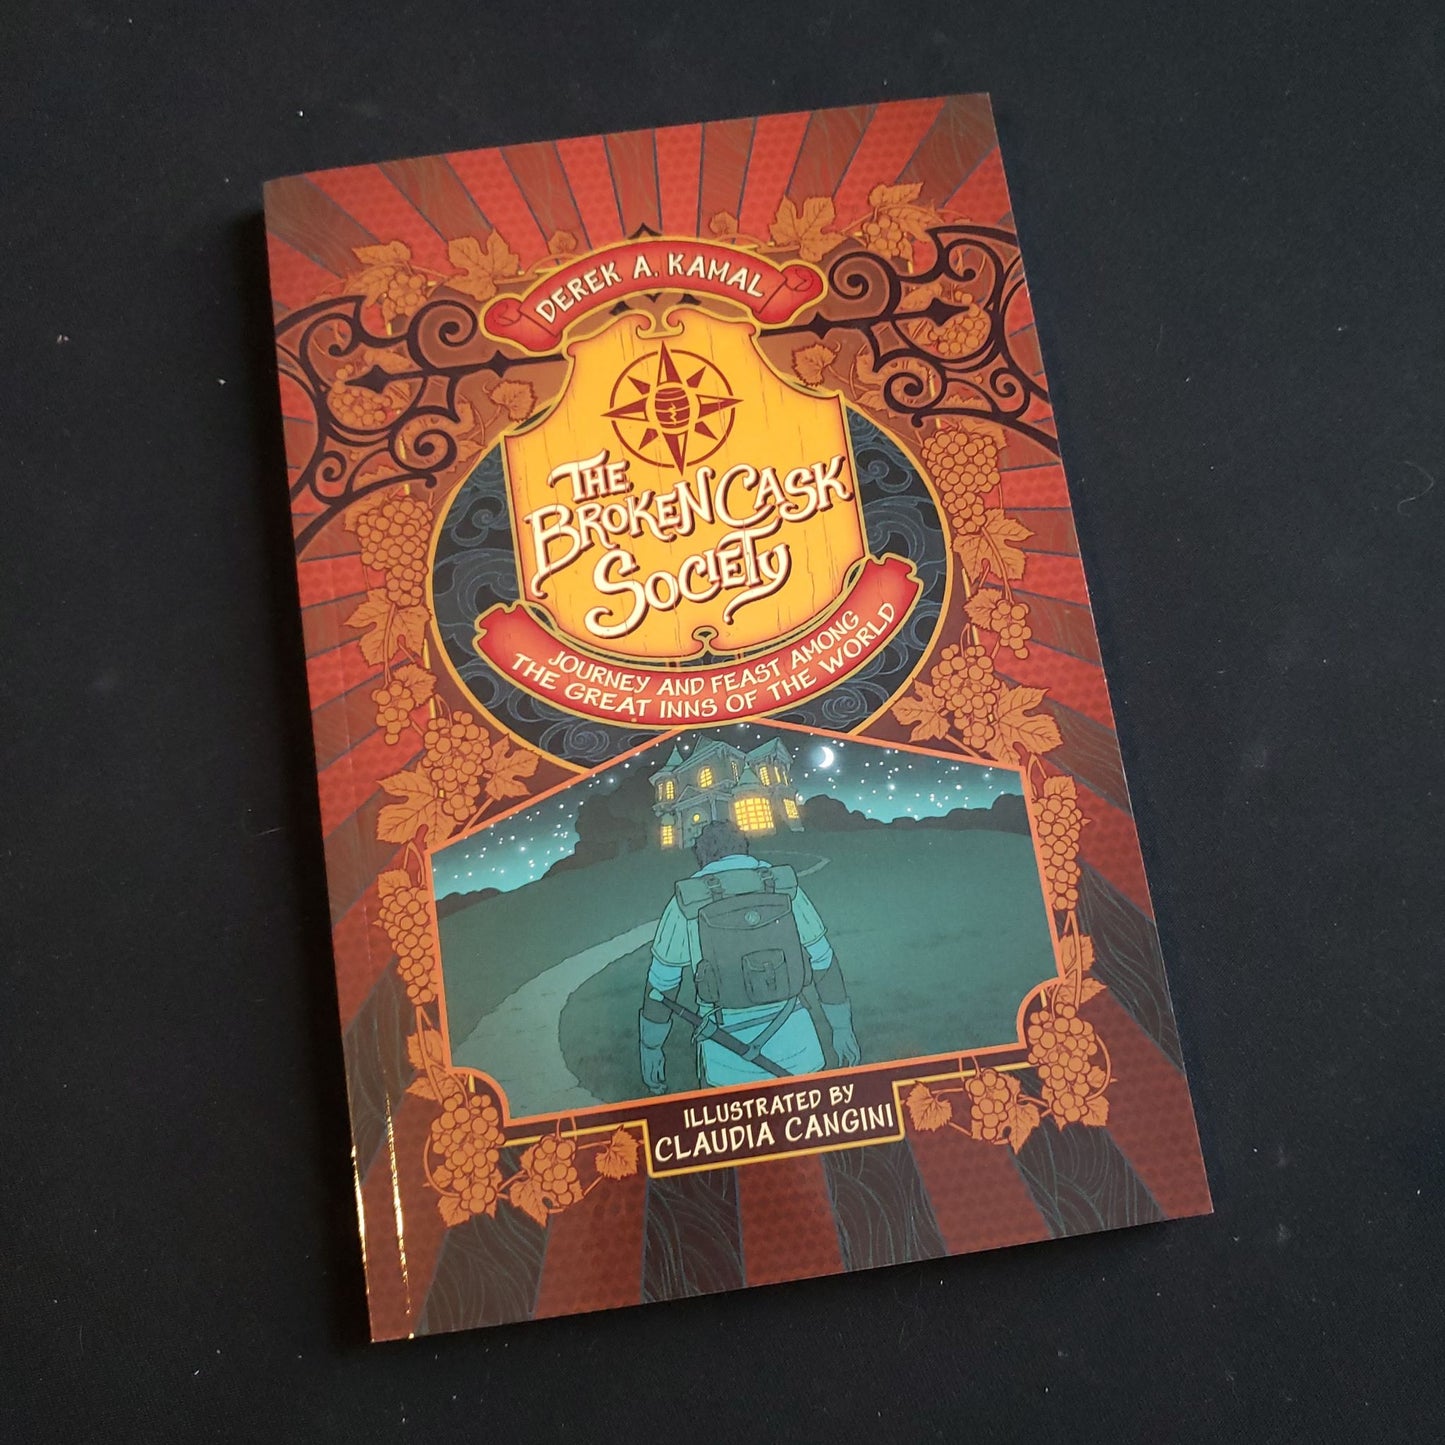 Image shows the front cover of the Broken Cask Society roleplaying game book